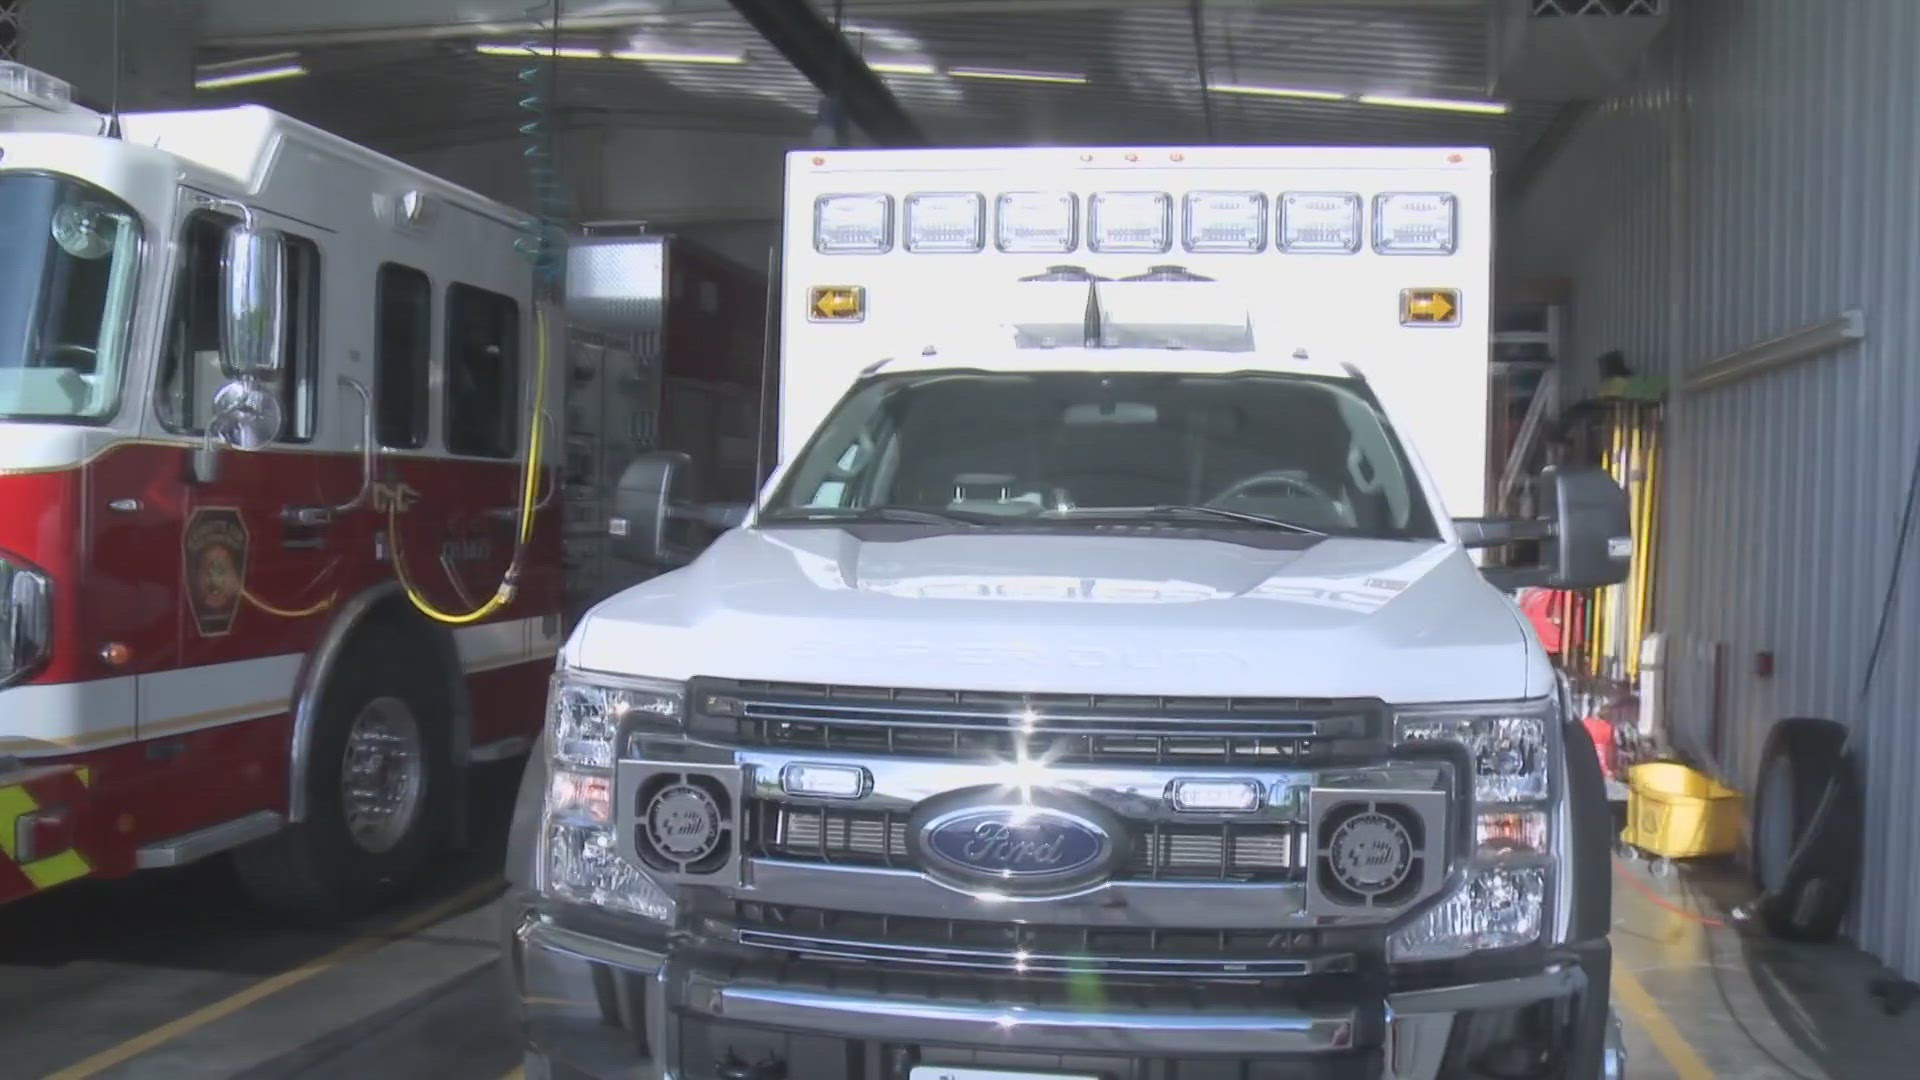 After weeks of debate, Floyd County Indiana leaders have approved two new ambulance contracts.